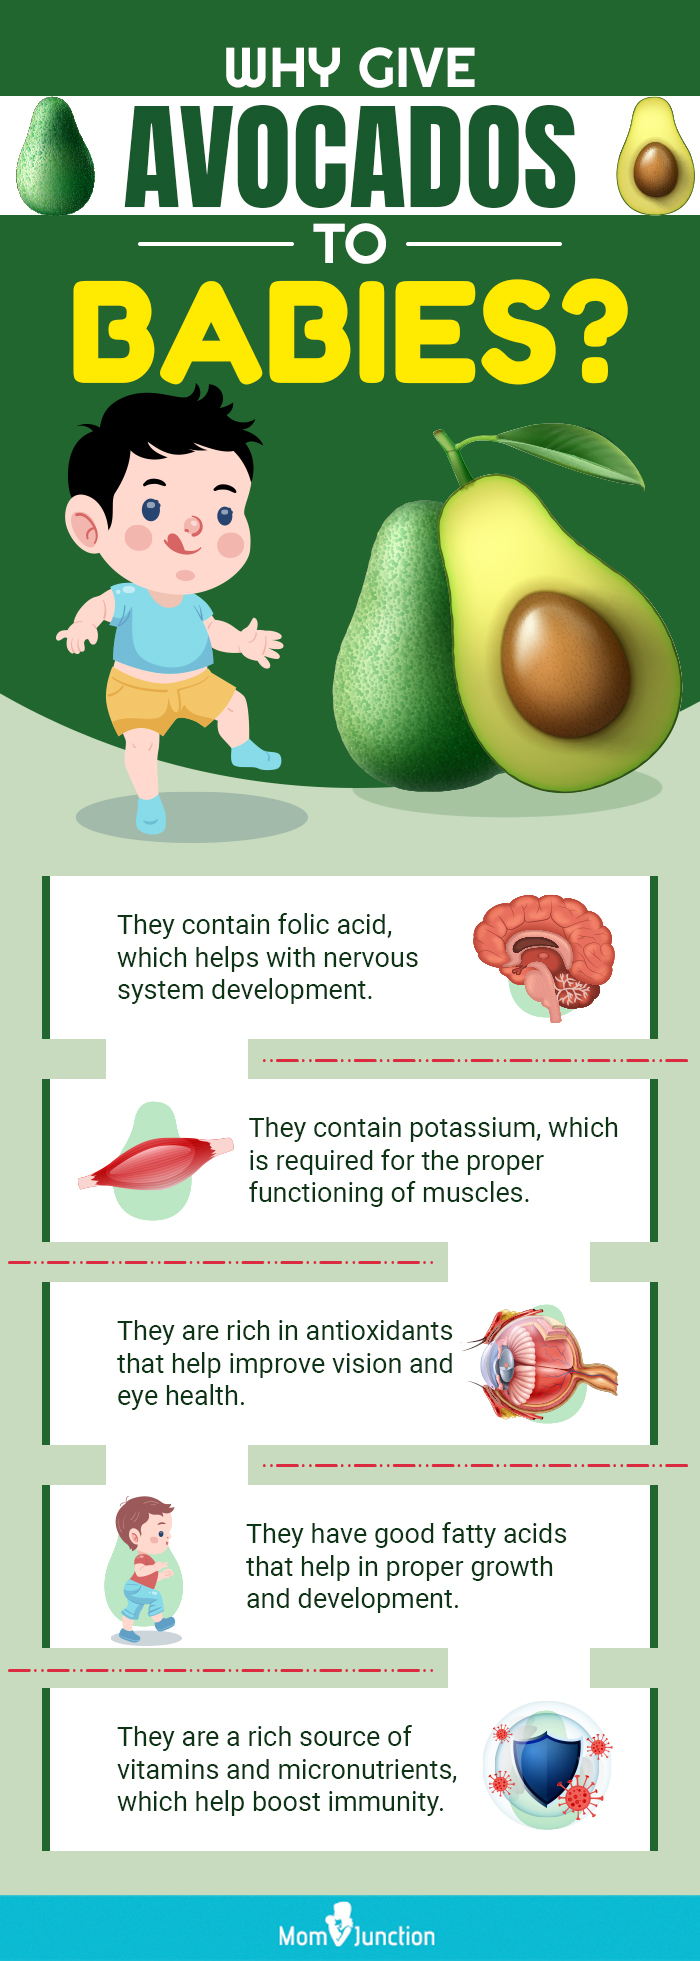 why give avocados to babies (infographic)